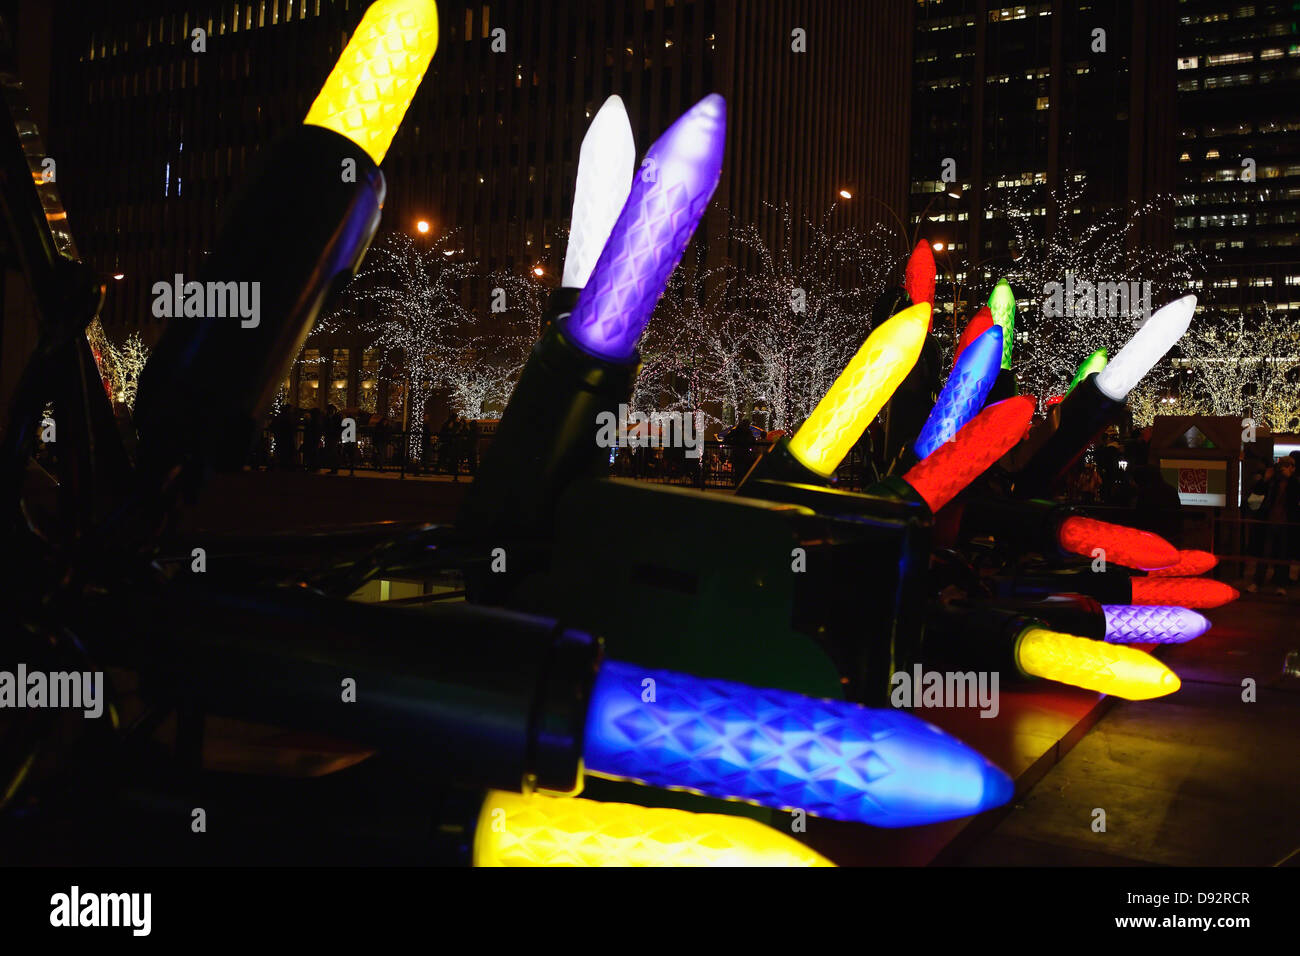 Giant Holiday Lights on the Street at Night, 6th Avenue, Manhattan, New York City Stock Photo